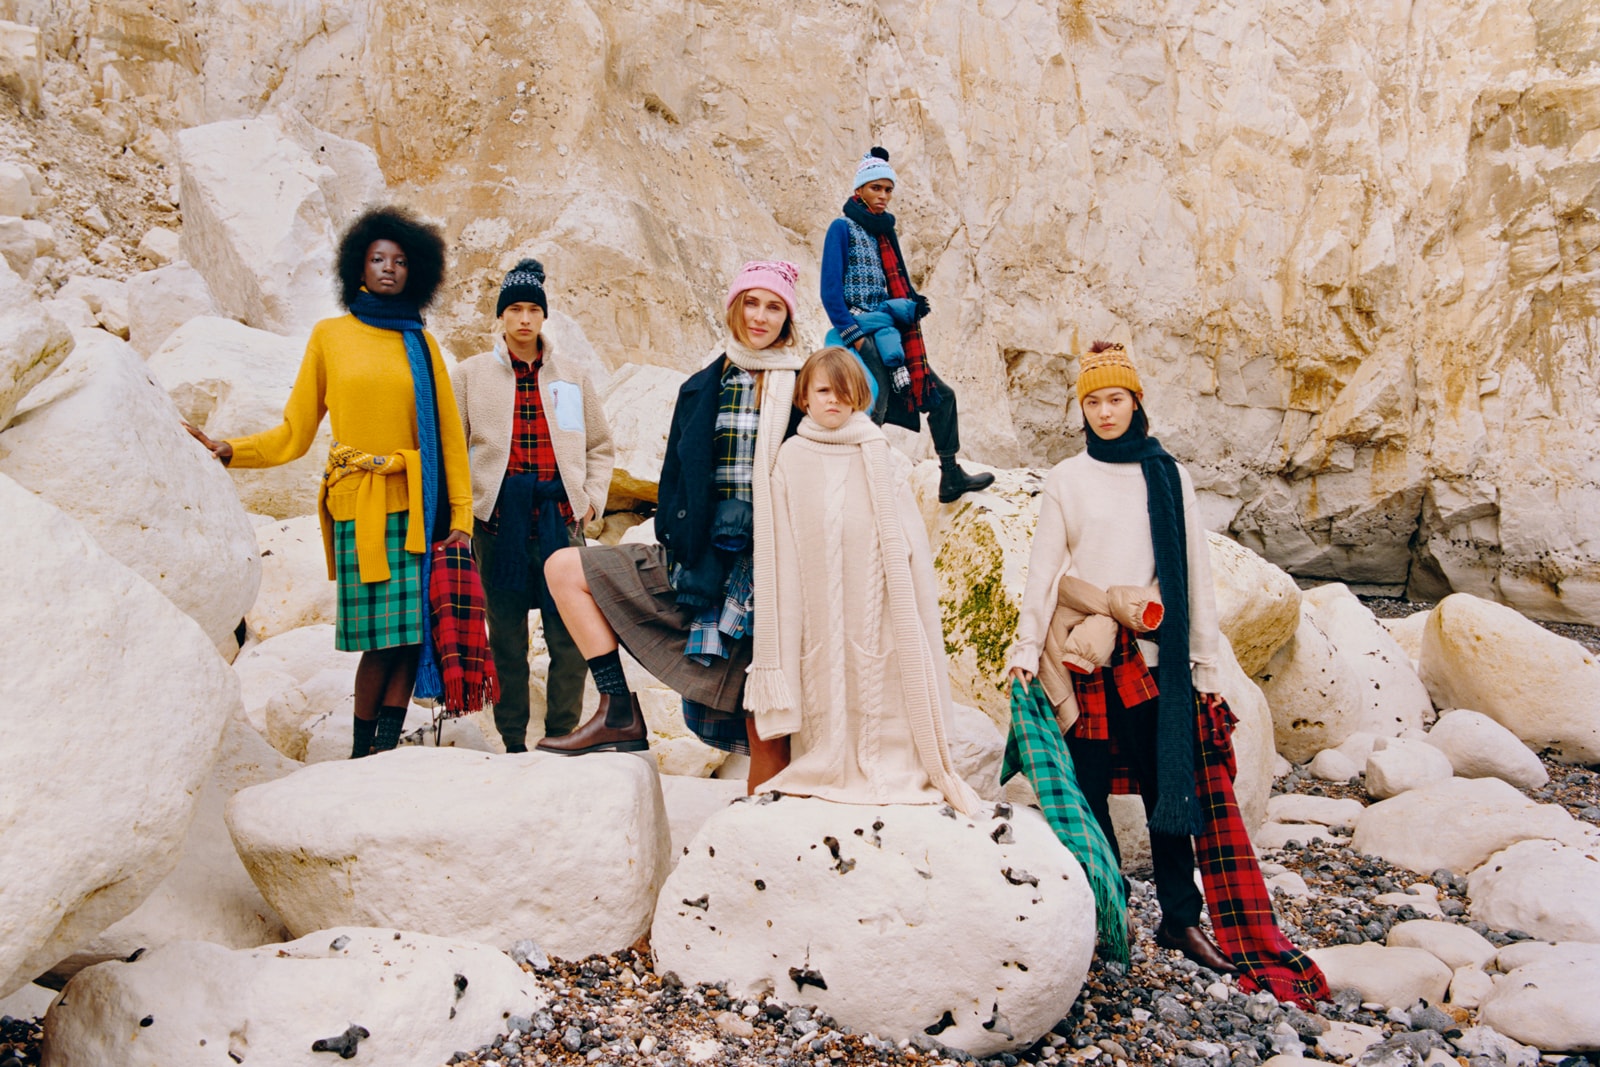 Uniqlo ユニクロ and JWアンダーソン コラボ 秋冬コレクション タータンチェック JW Anderson teams up for the latest collection 2019 fall winter british life wear 